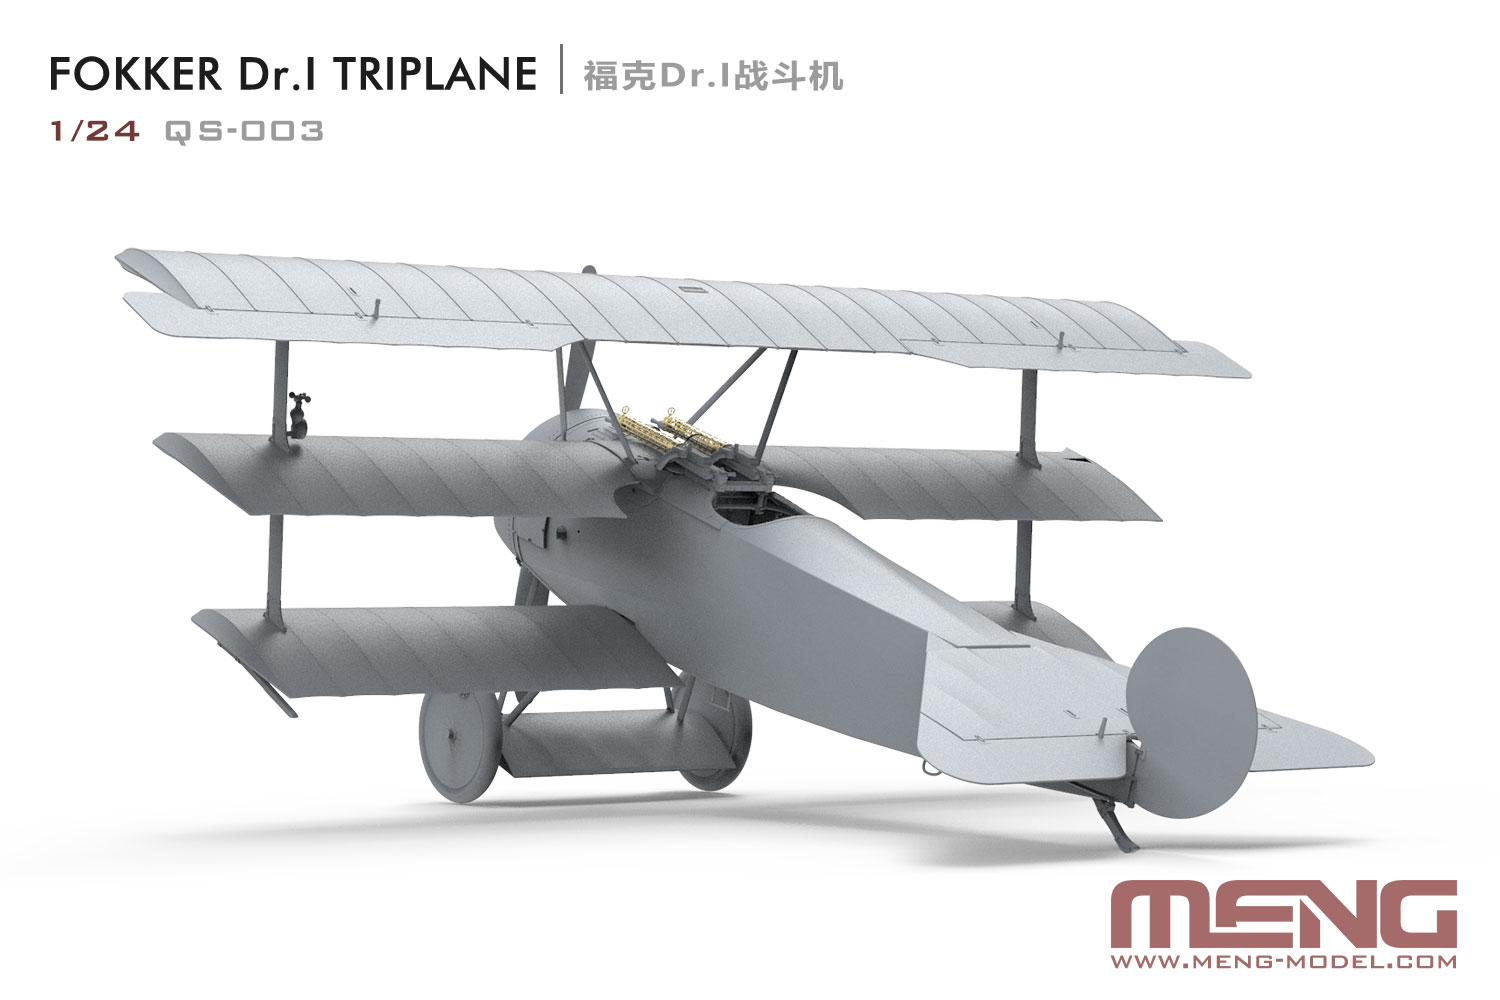 Product News-Fokker Dr.I, Master of the Sky-Rui Ye Century 